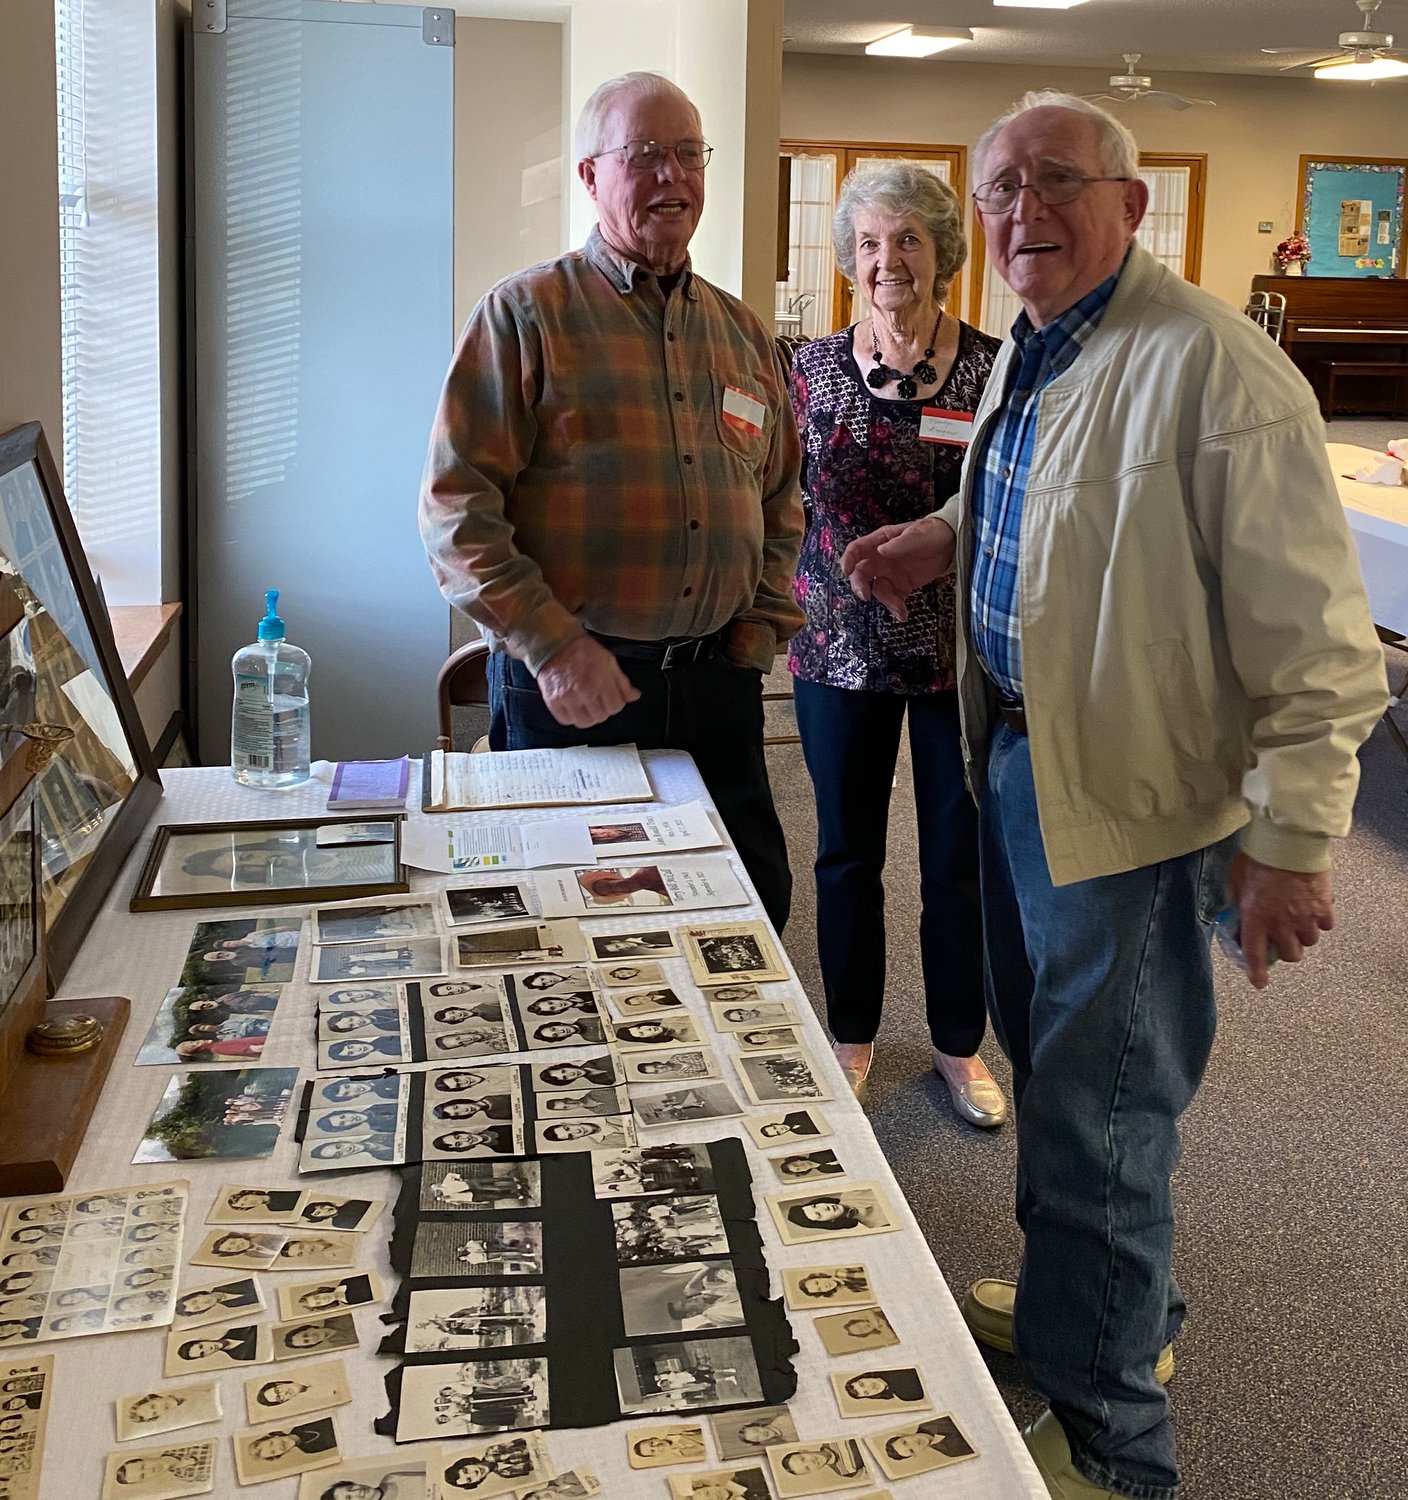 A trip down memory lane. The Elkland alumni shared photos, clippings and smiles when reminiscing their days at the Elkland school.